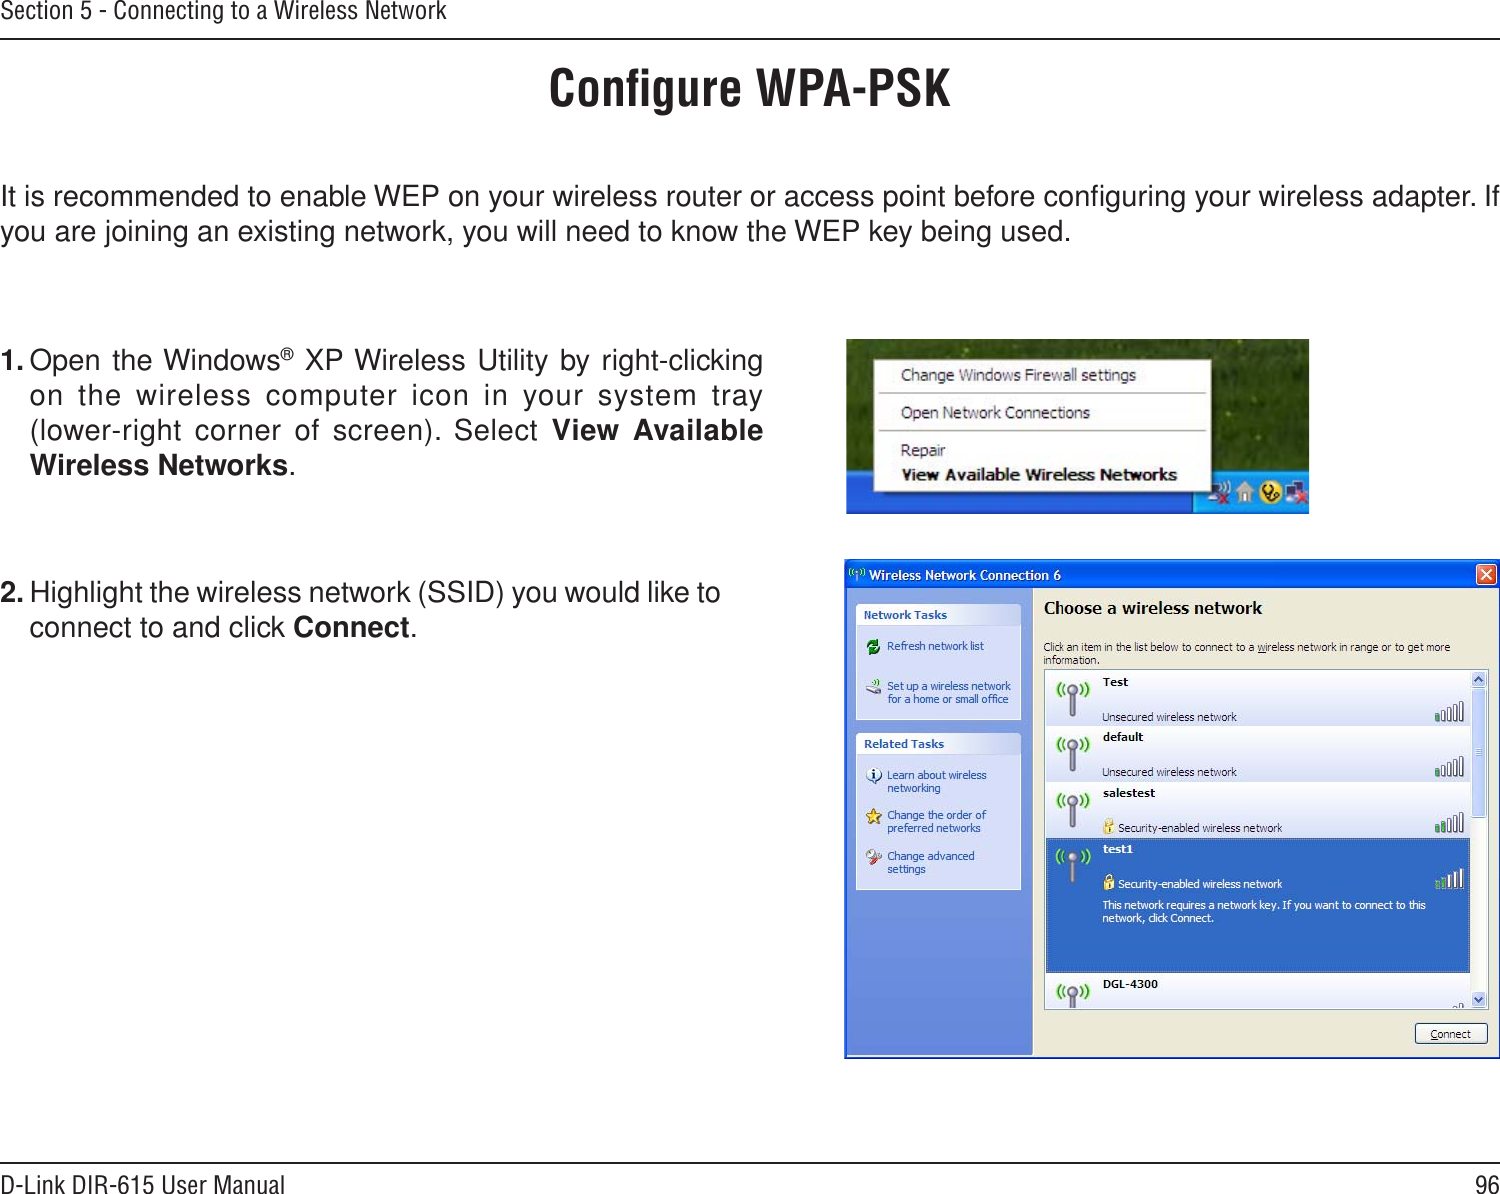 96D-Link DIR-615 User ManualSection 5 - Connecting to a Wireless NetworkConﬁgure WPA-PSKIt is recommended to enable WEP on your wireless router or access point before conﬁguring your wireless adapter. If you are joining an existing network, you will need to know the WEP key being used.2. Highlight the wireless network (SSID) you would like to connect to and click Connect.1. Open the Windows® XP Wireless Utility by right-clicking on the wireless computer icon in your system tray  (lower-right corner of screen). Select  View Available Wireless Networks. 